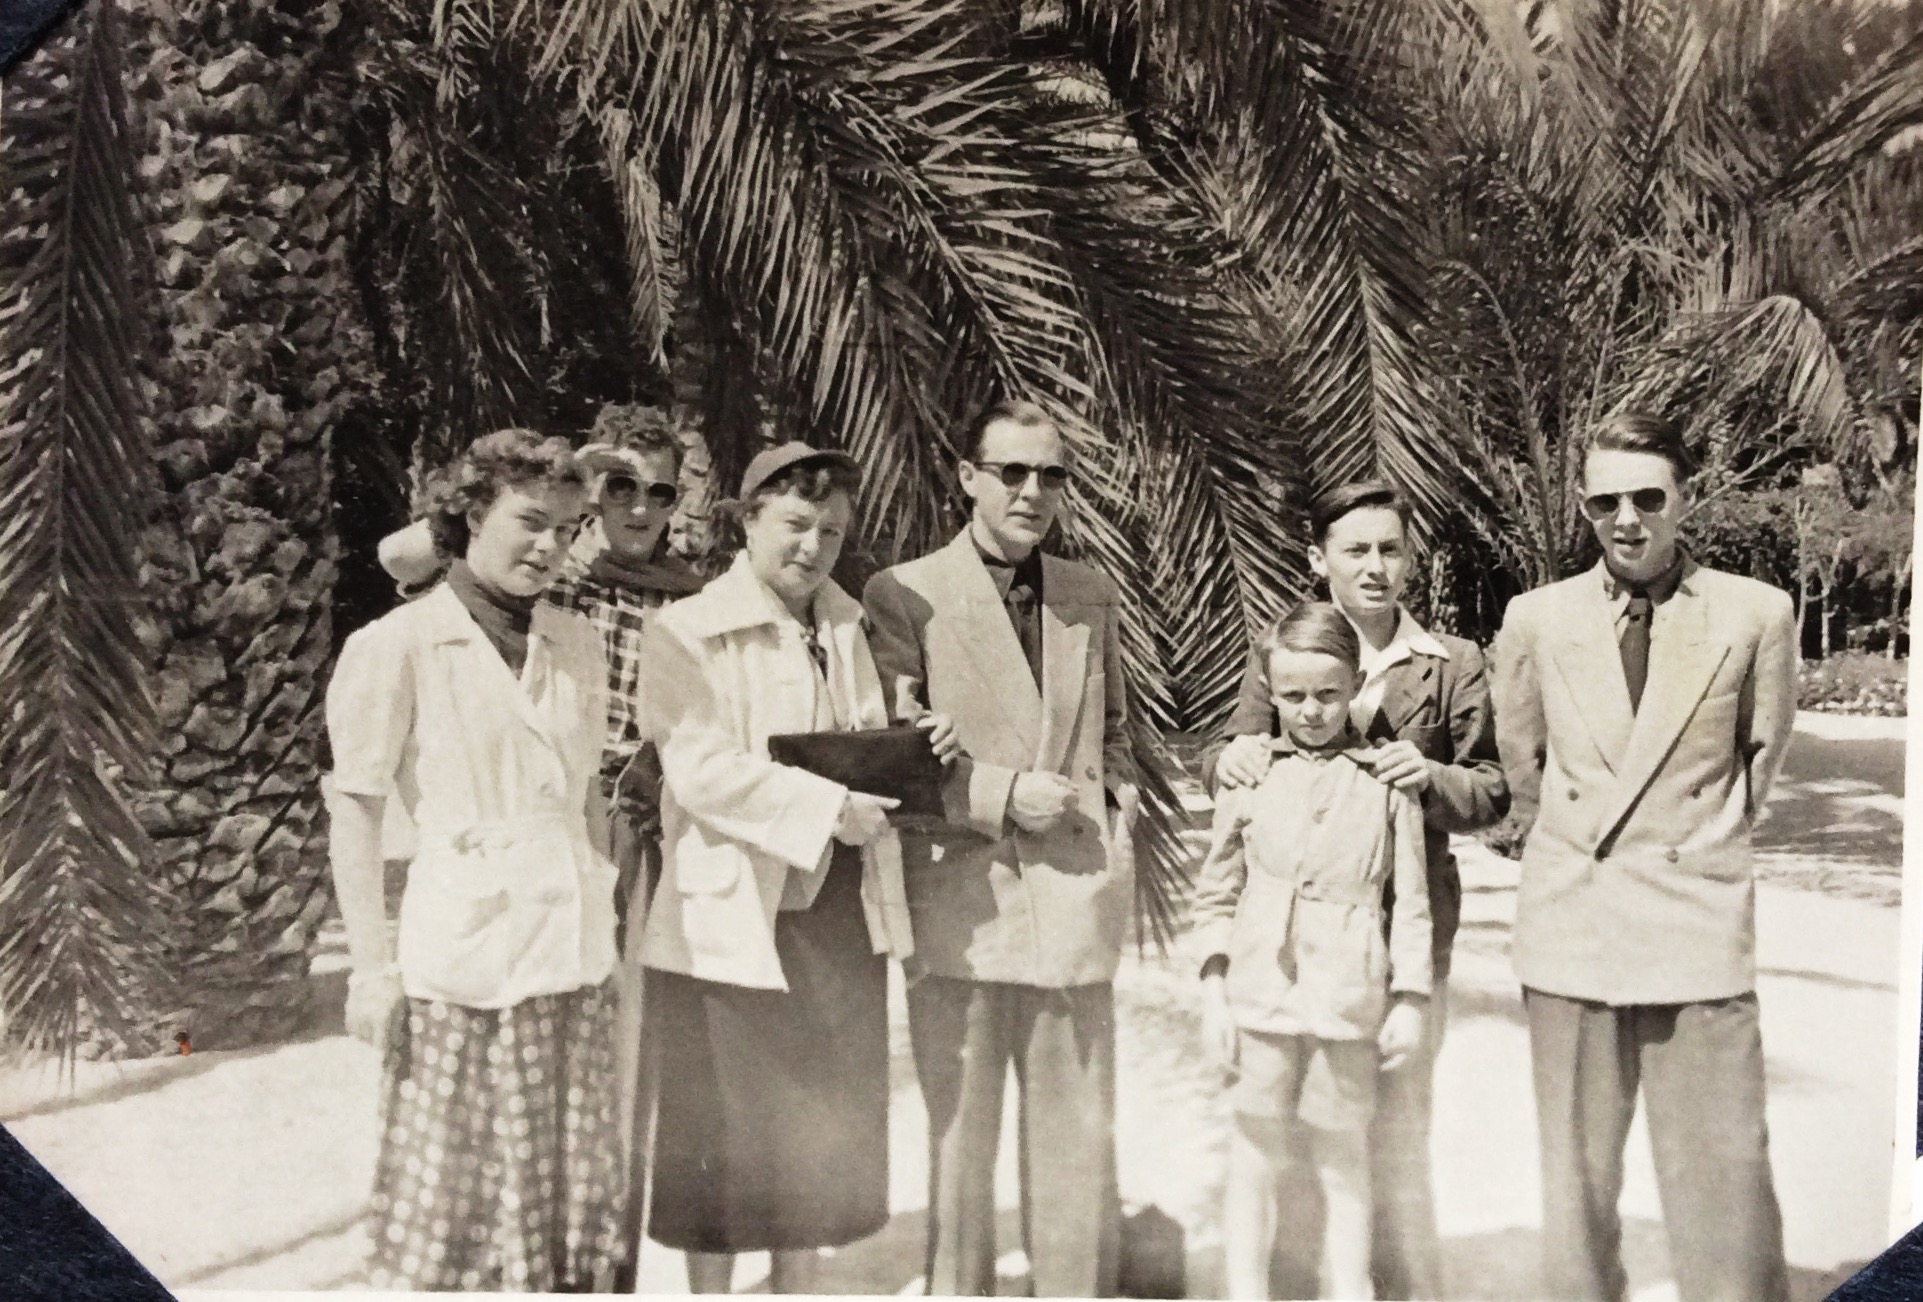 OUR FAMILY IN LAS PALMAS, MARCH, 1953...Excursion from the SS.ZUIDERKRUIS on our way to Cape Town.